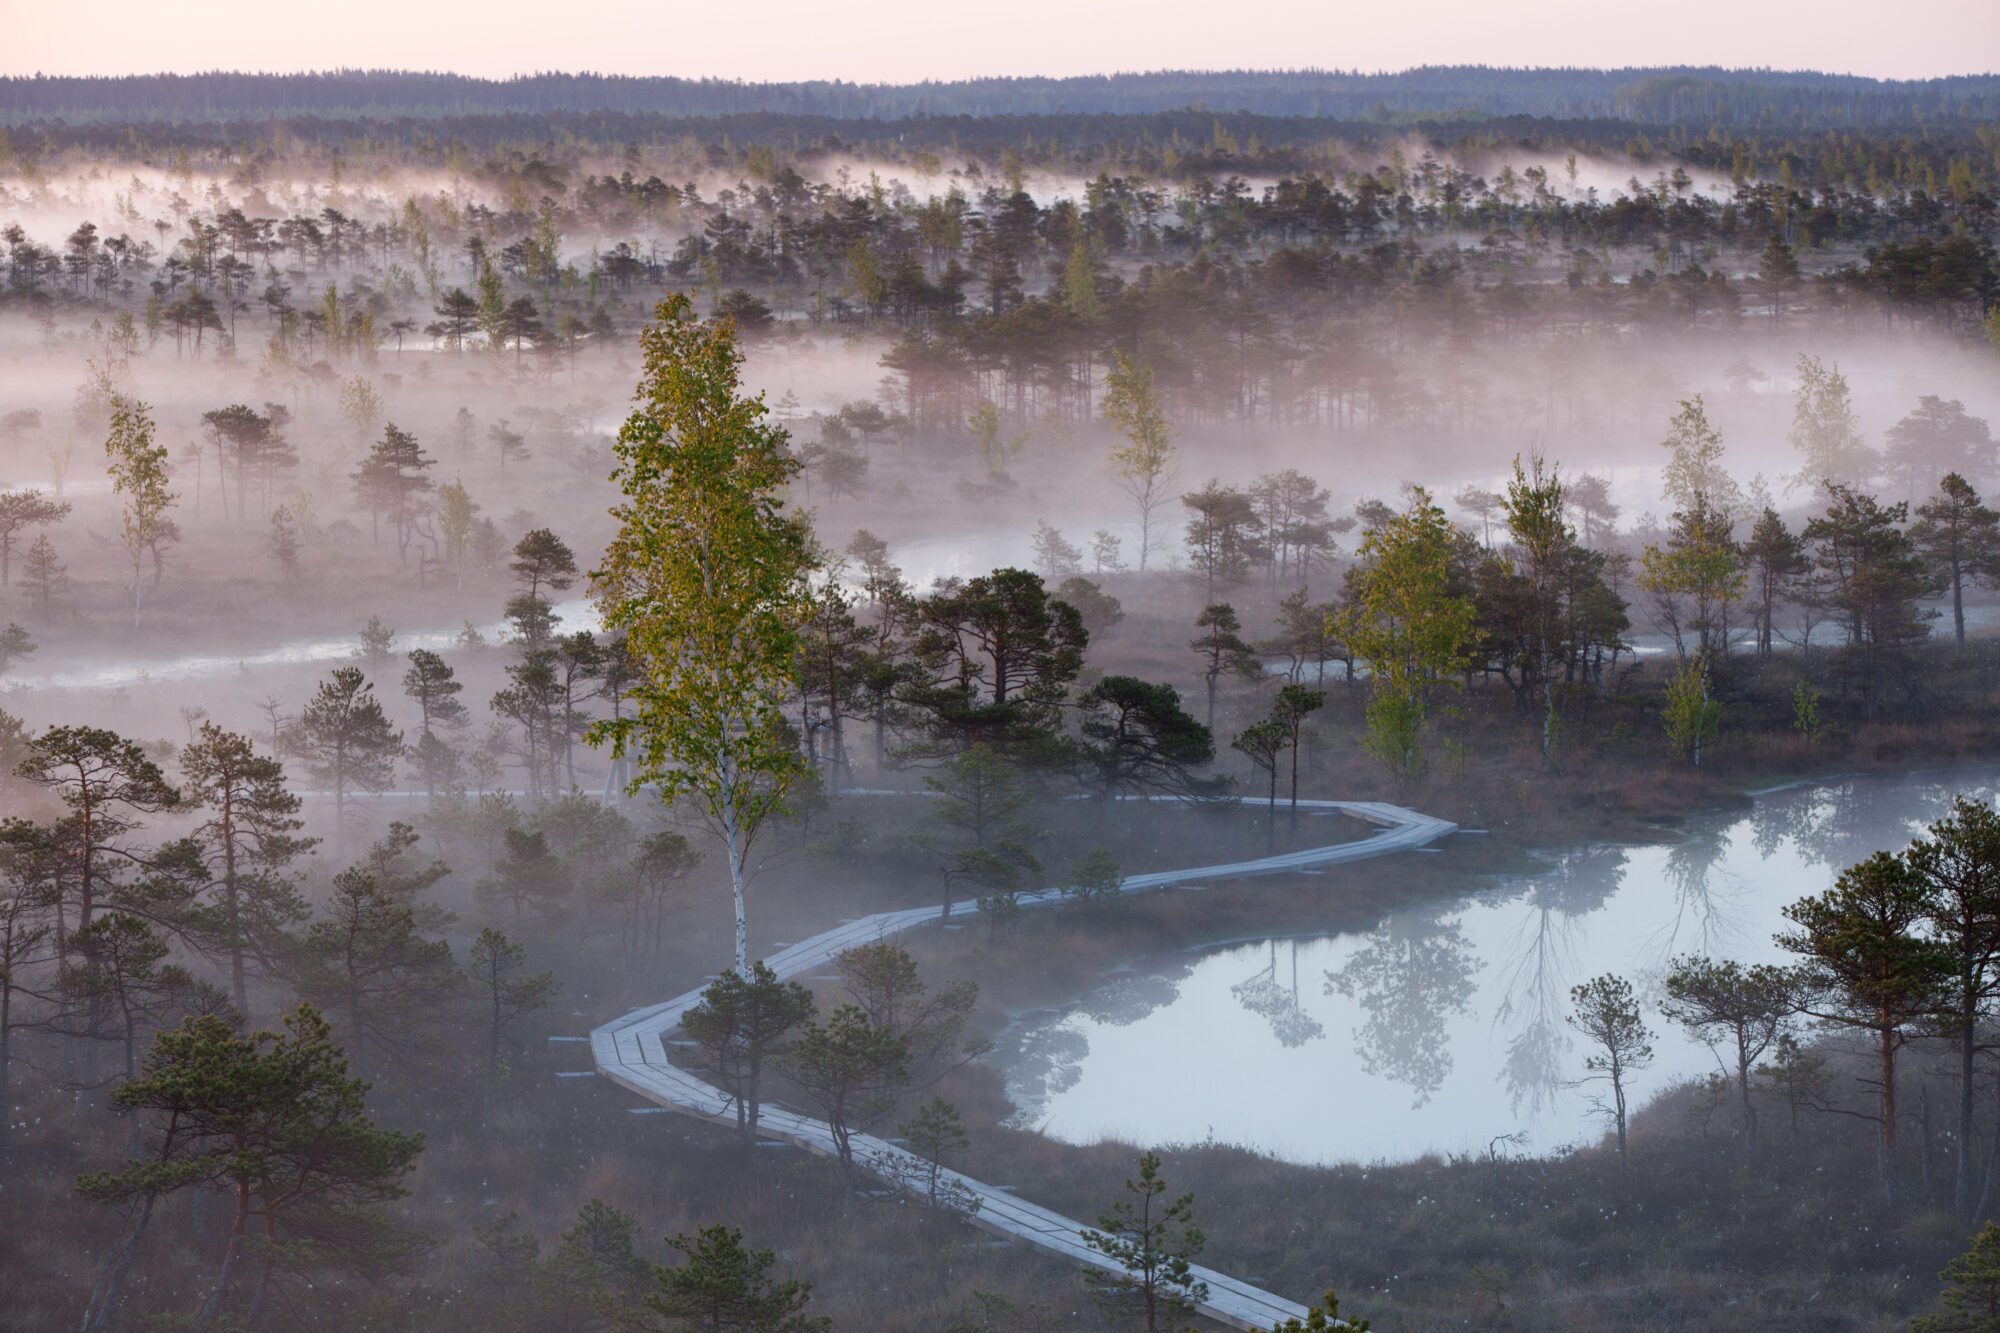 Mist settles on a landscape forest and water